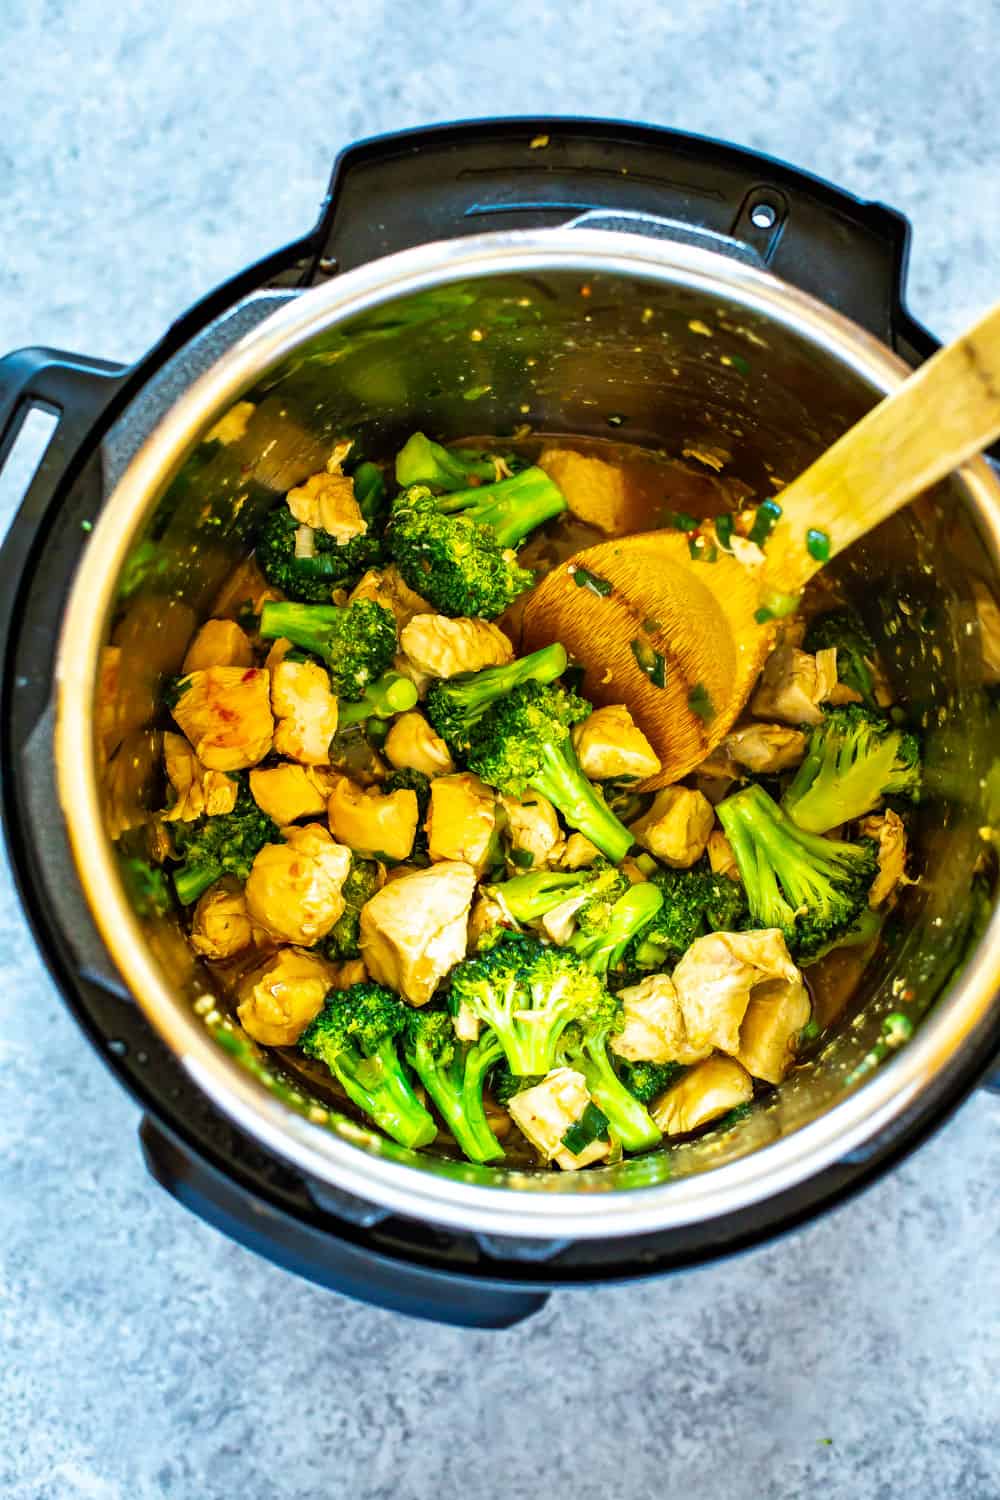 Chicken and Broccoli dinner in an Instant Pot multicooker